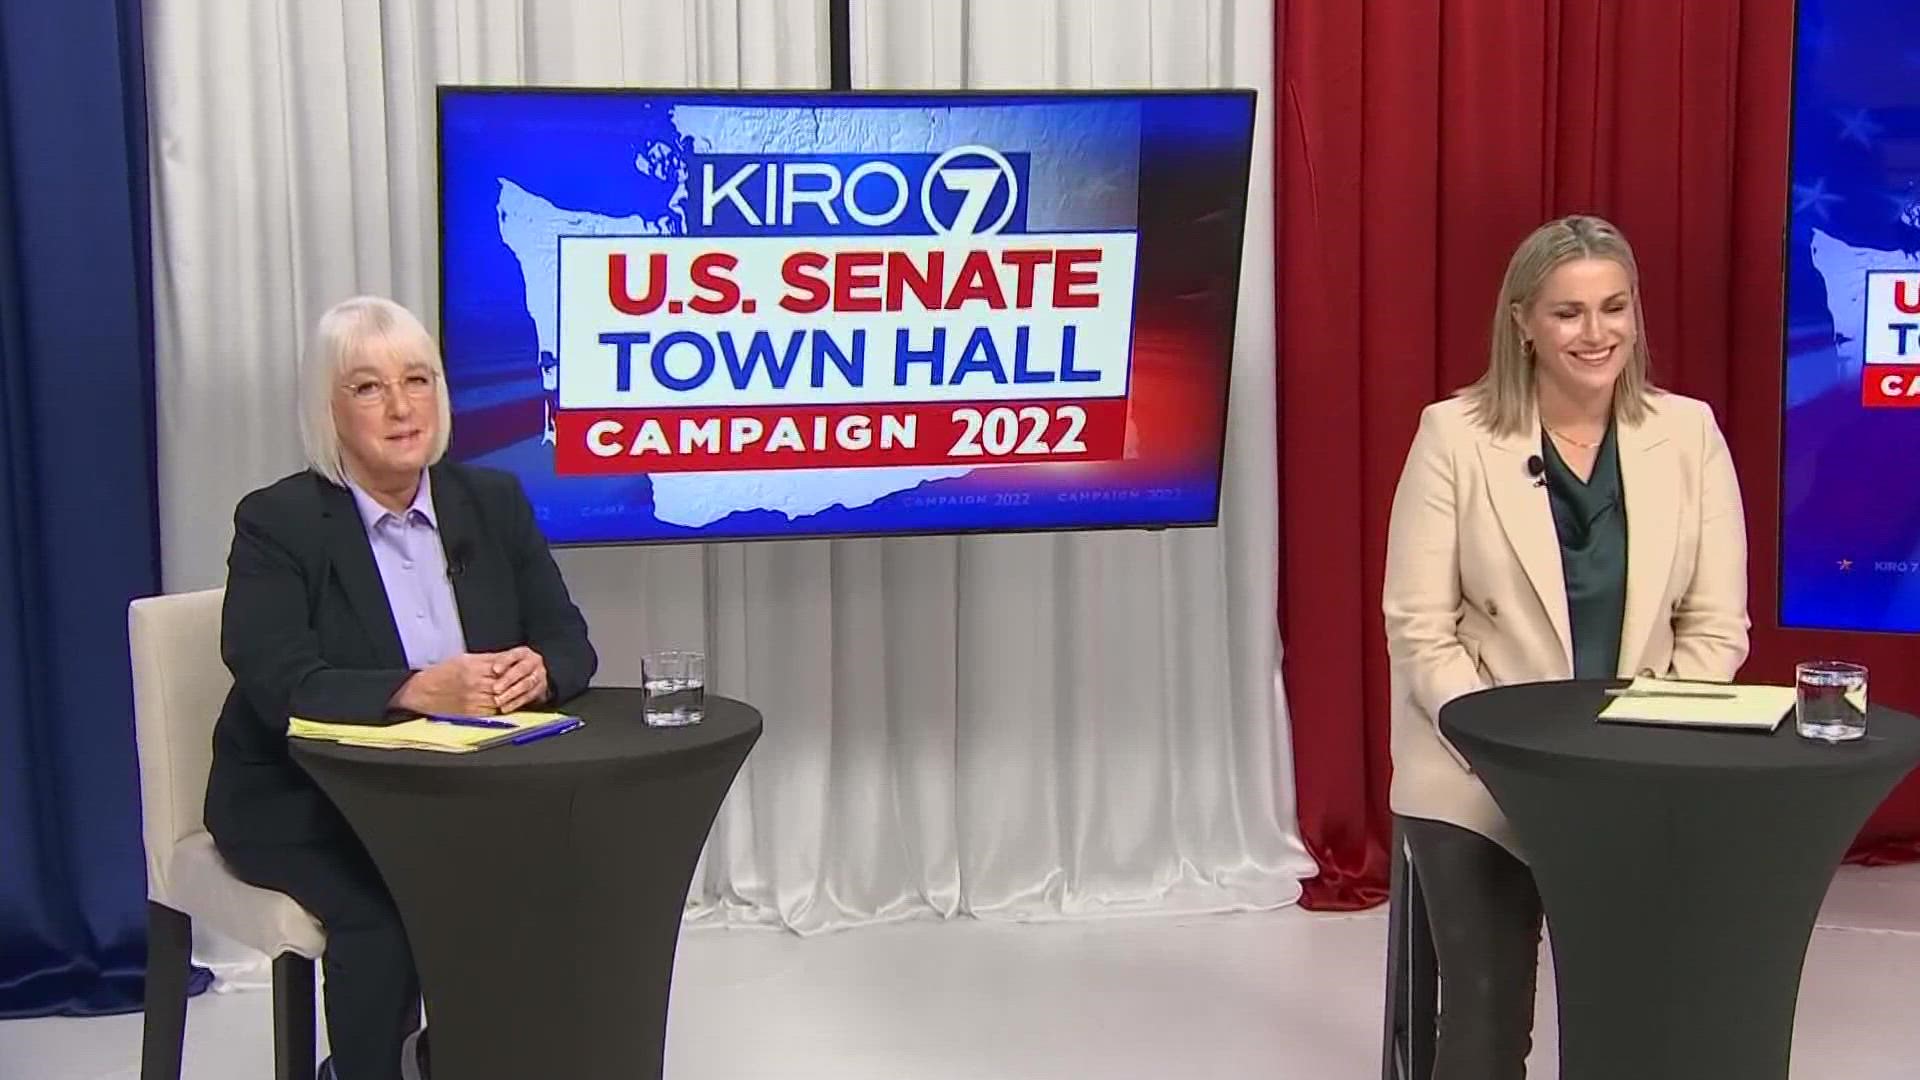 A KING5 Poll found abortion and inflation are the top issues for voters. The candidates addressed both during the townhall.